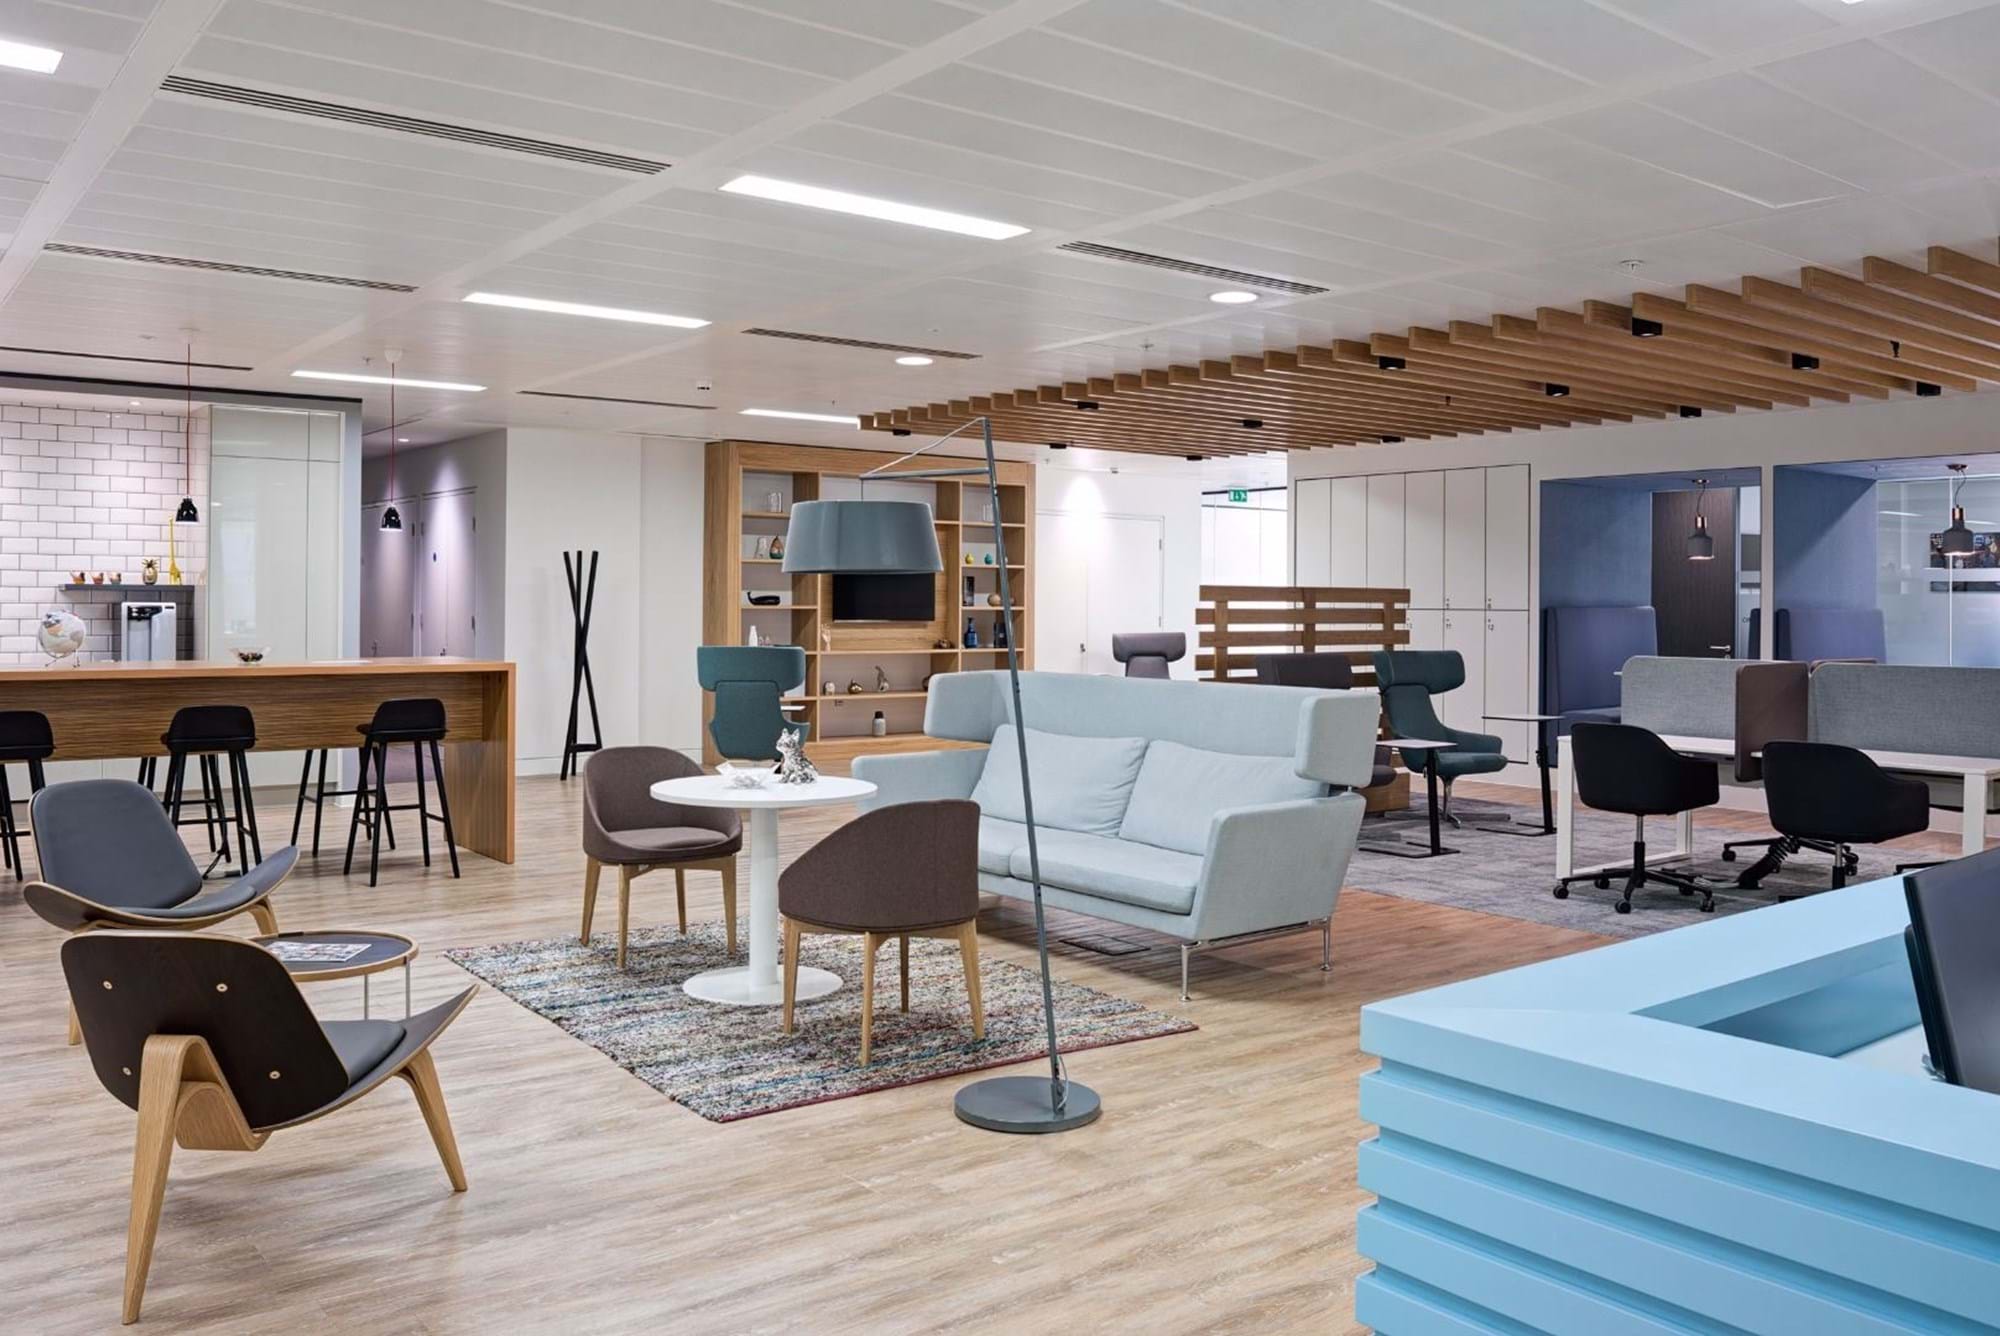 Modus Workspace office design, fit out and refurbishment - Regus St Marys Axe - Regus SMA 01 highres sRGB.jpg